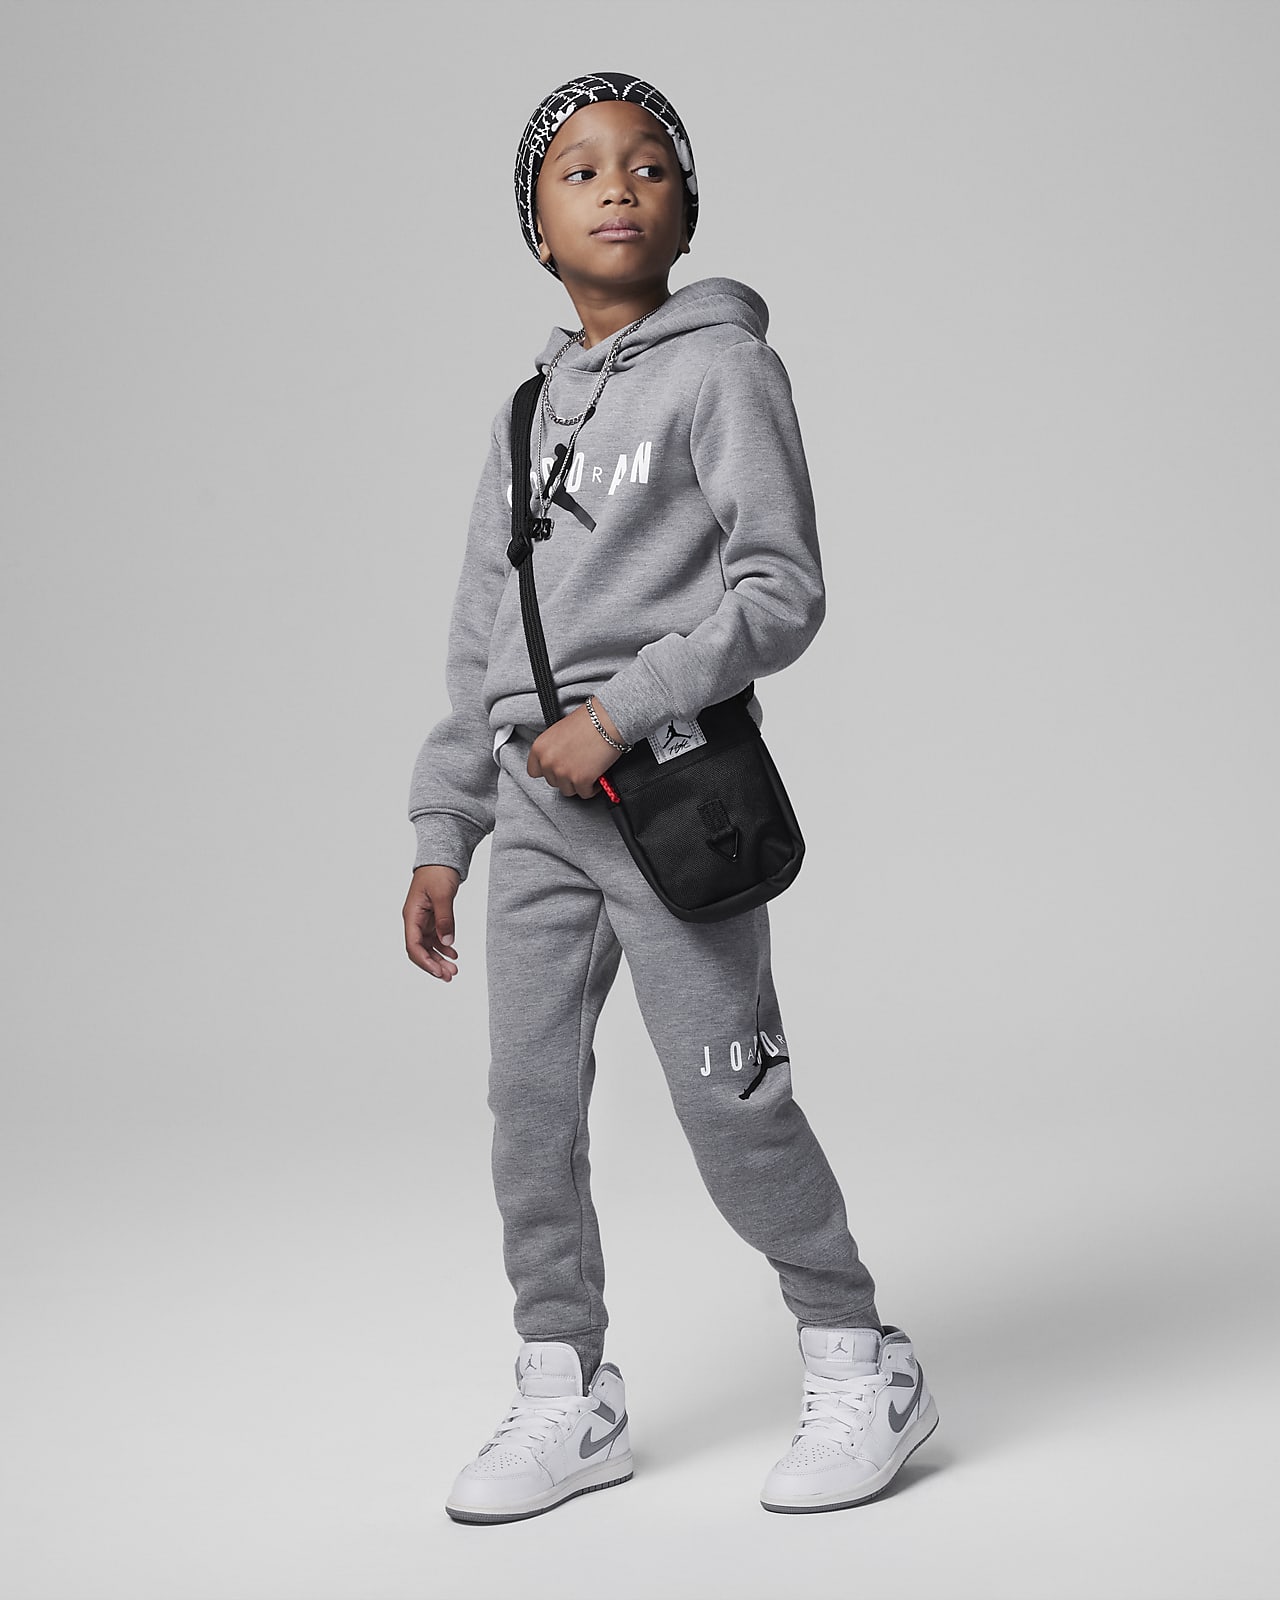 Jordan Sustainable Materials Pullover Hoodie Set Younger Kids' 2-Piece Set